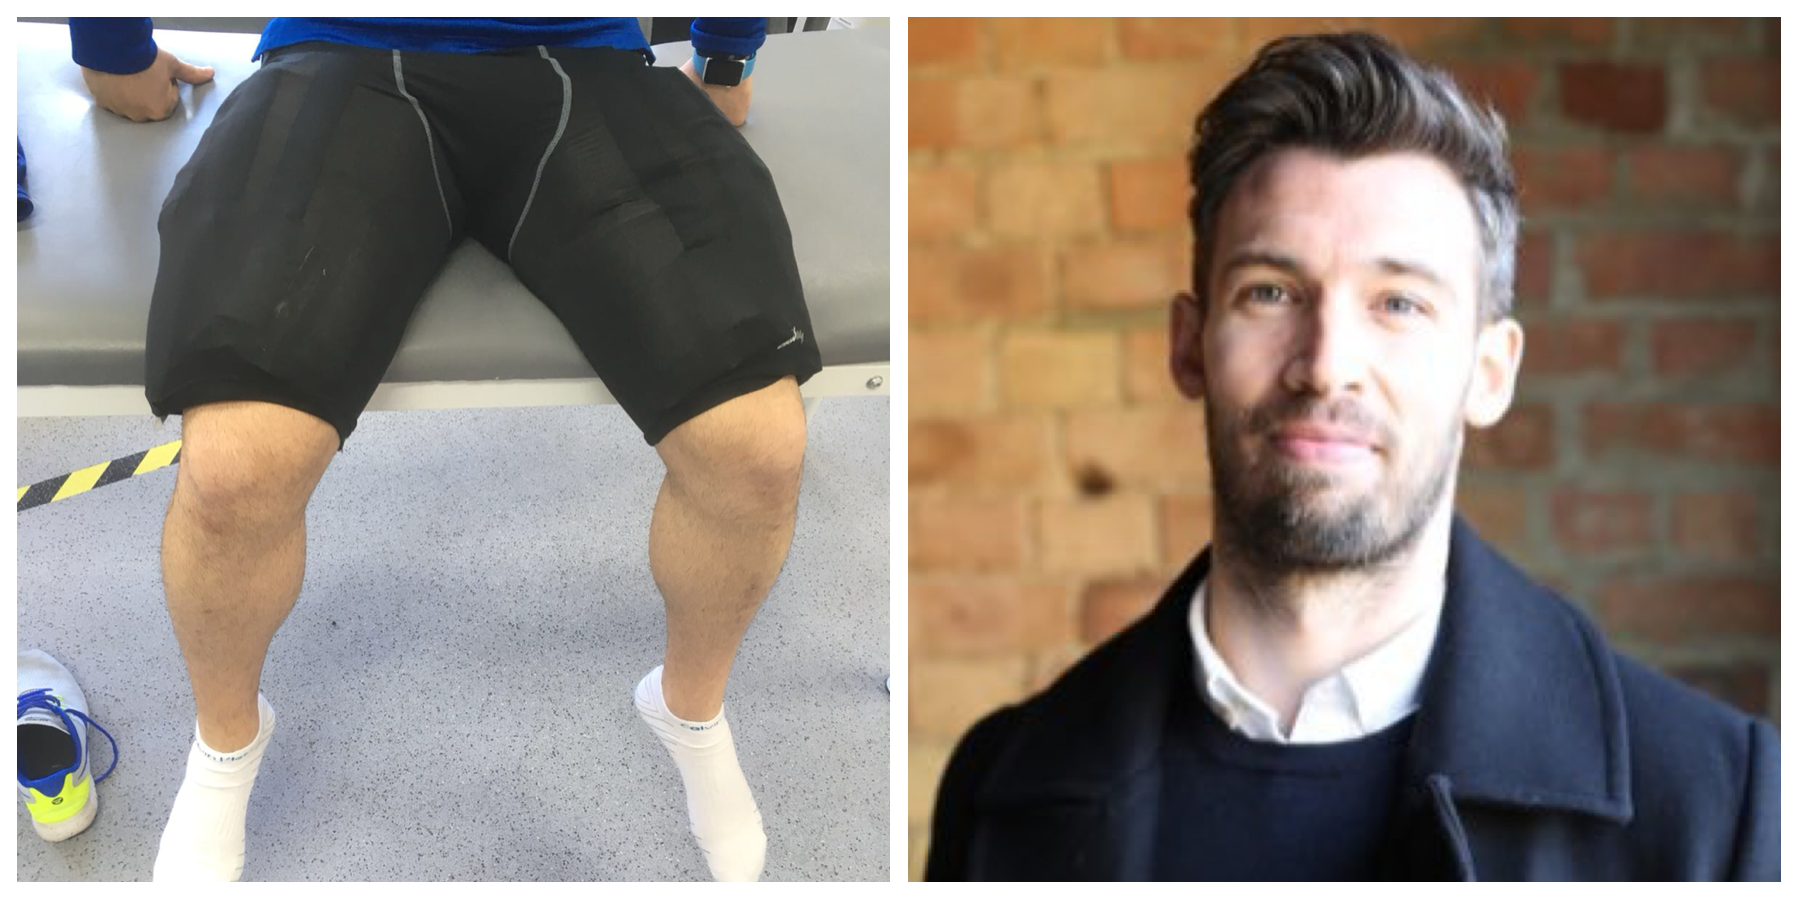 Can men wear tights as an alternative to shorts when playing